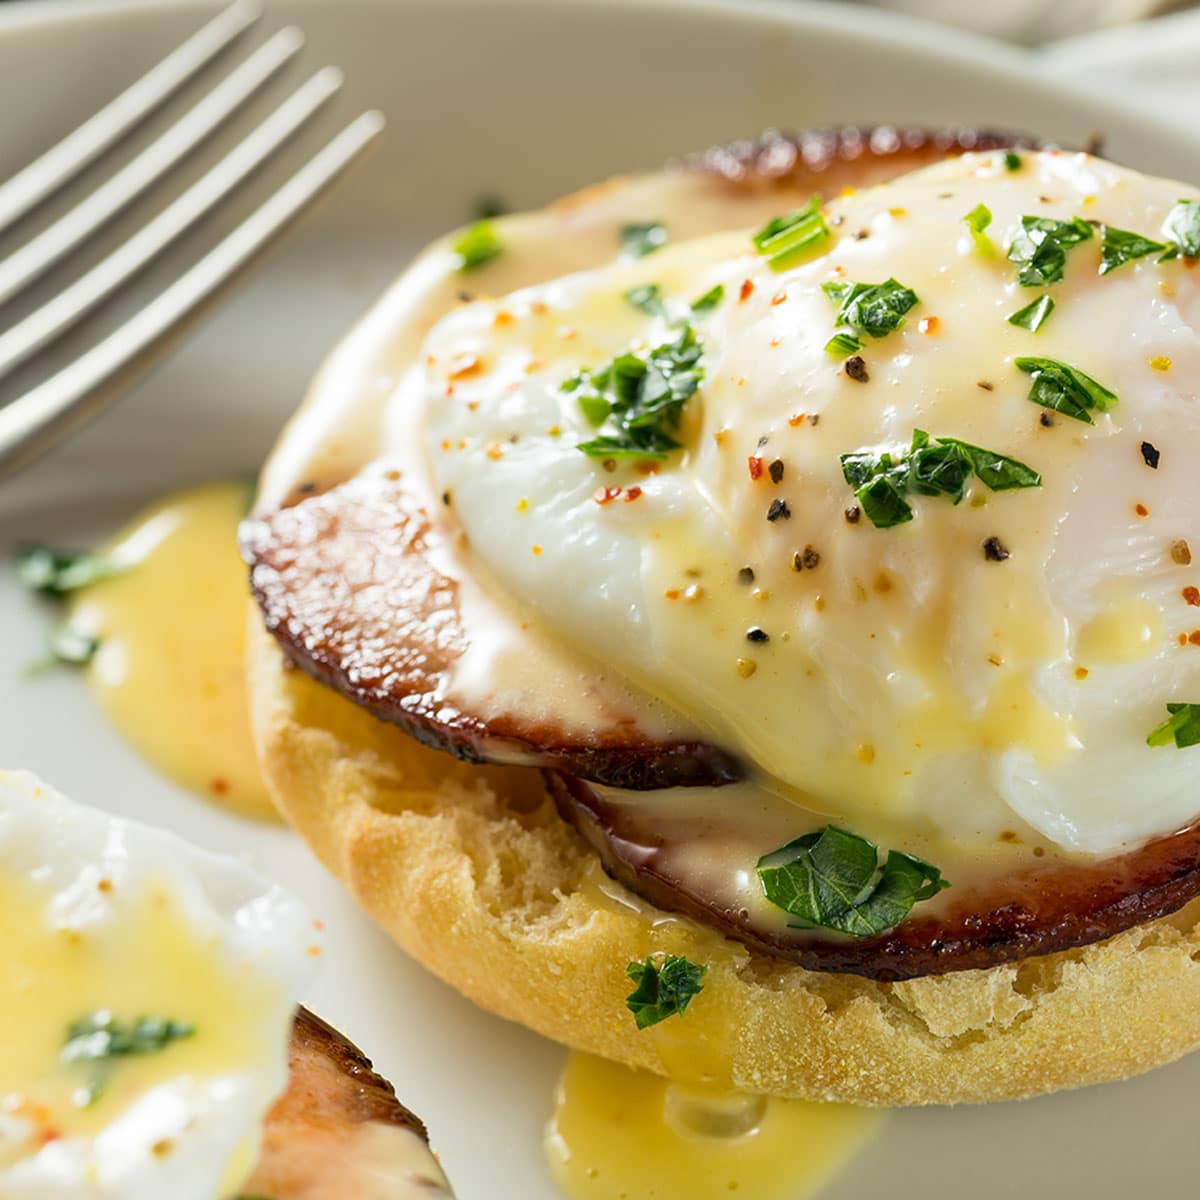 Hollandaise sauce is an emulsion-based combination of yolks, creamy melted butter, and lemon juice. In some instances, vinegar reduction or white wine may substitute the lemon juice.